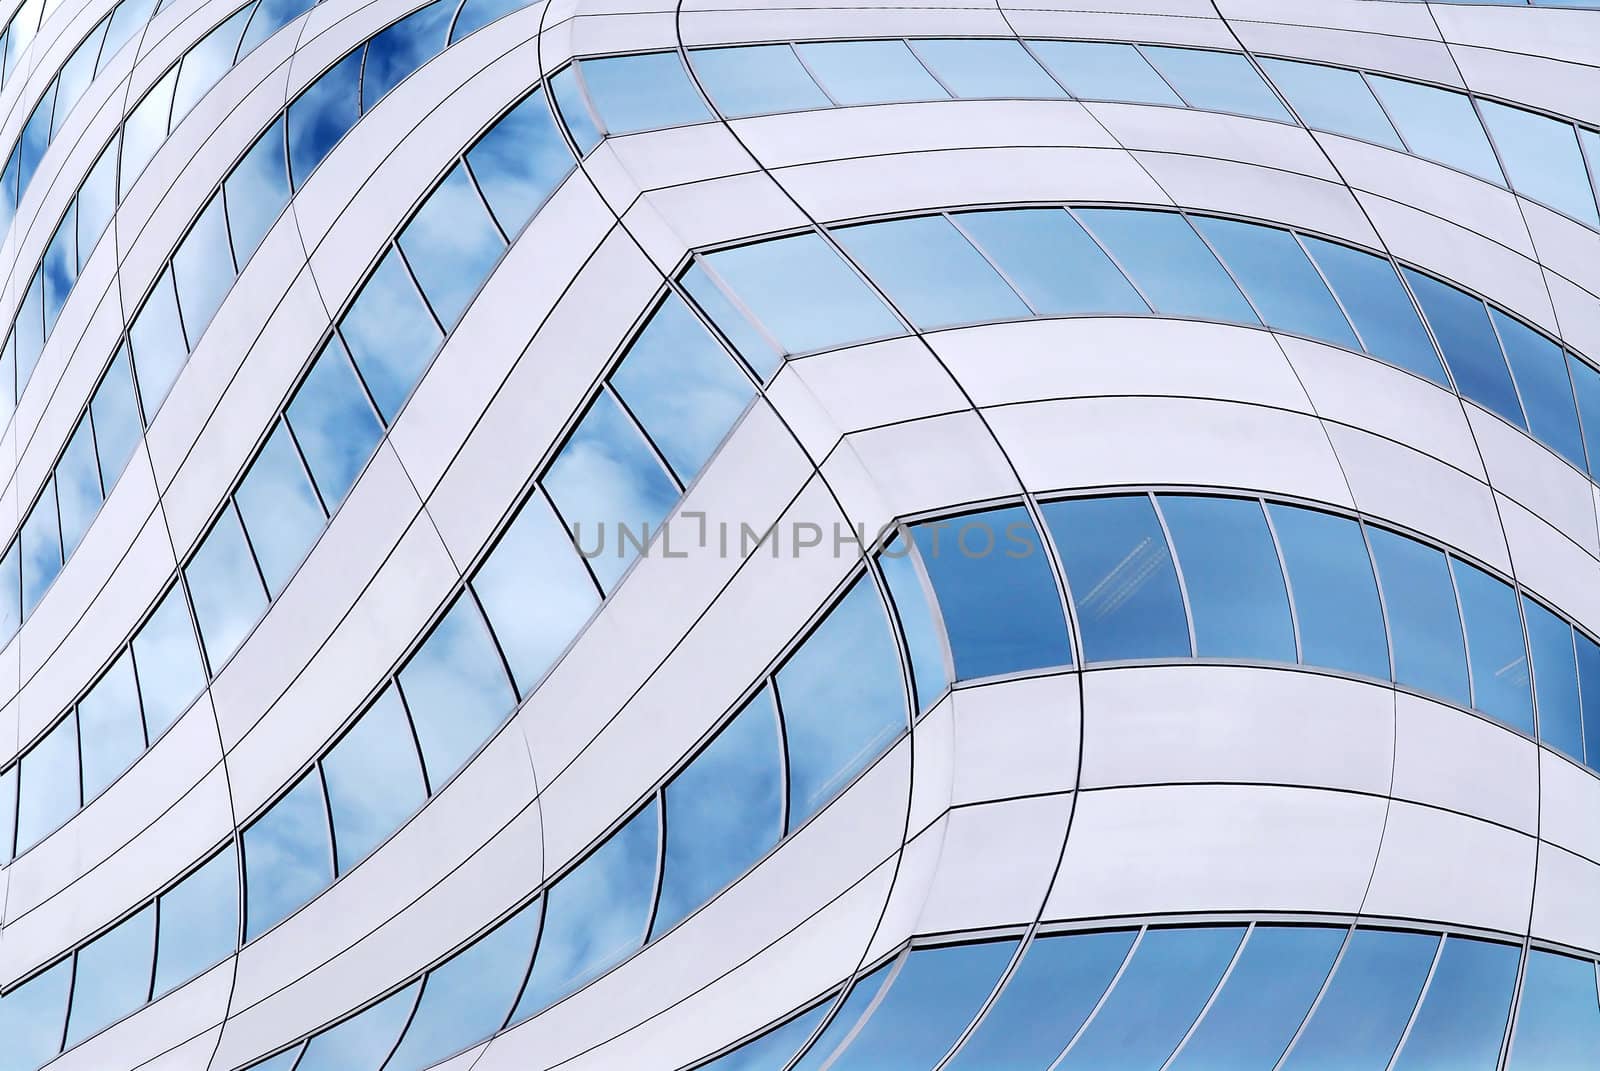 Abstract background of distorted office building walls